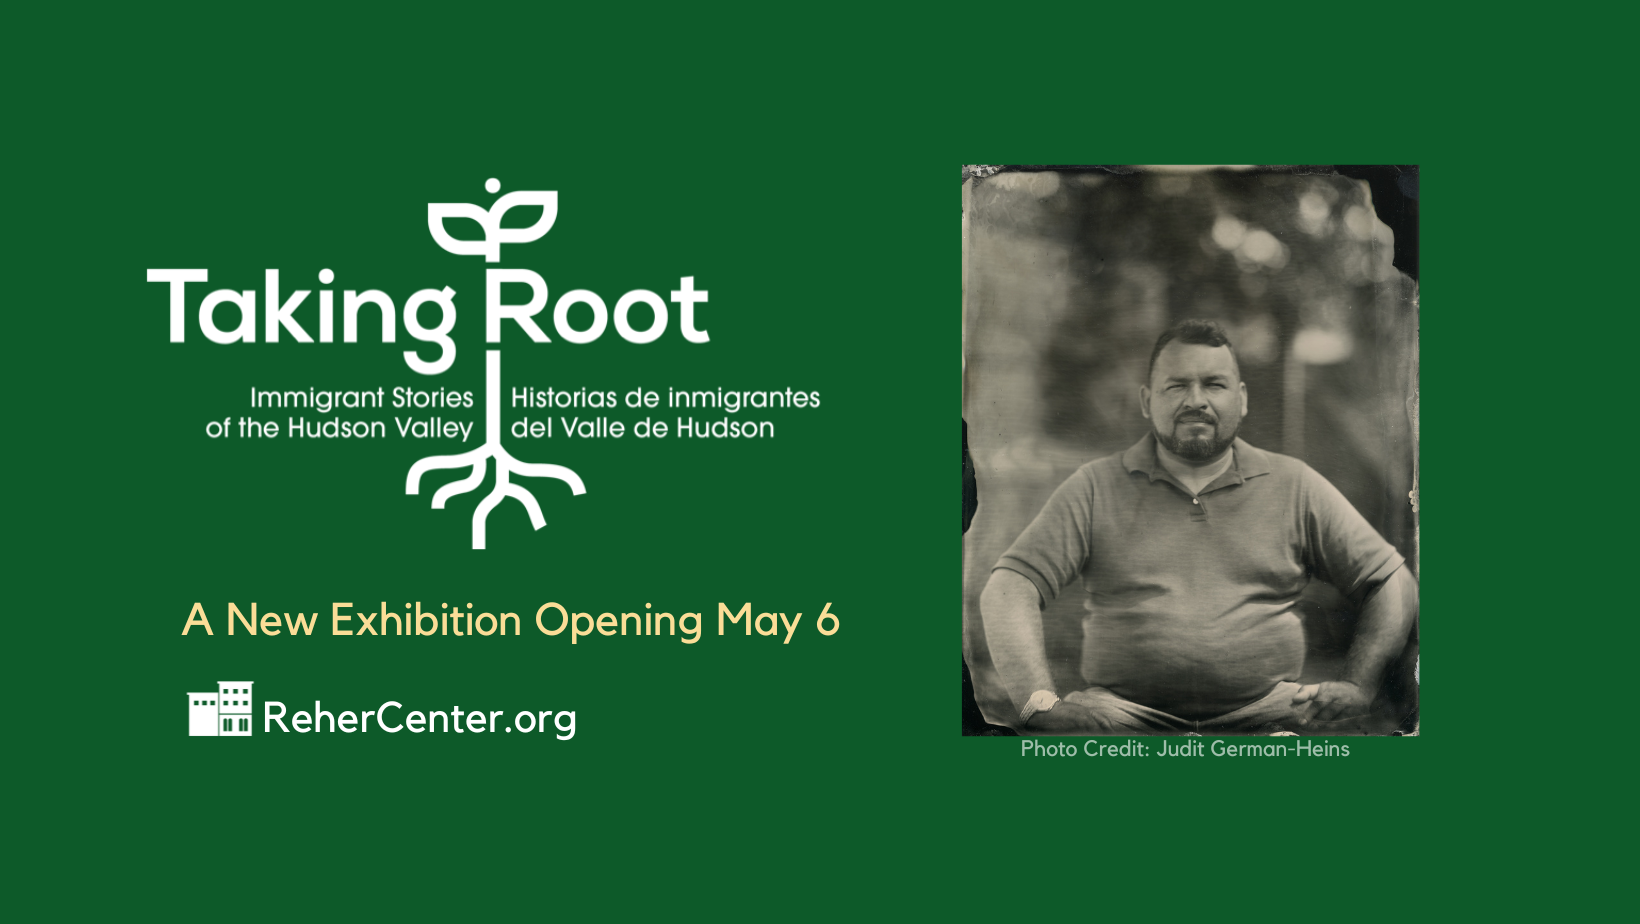 Exhibit Opening - Taking Root: Immigrant Stories of the Hudson Valley